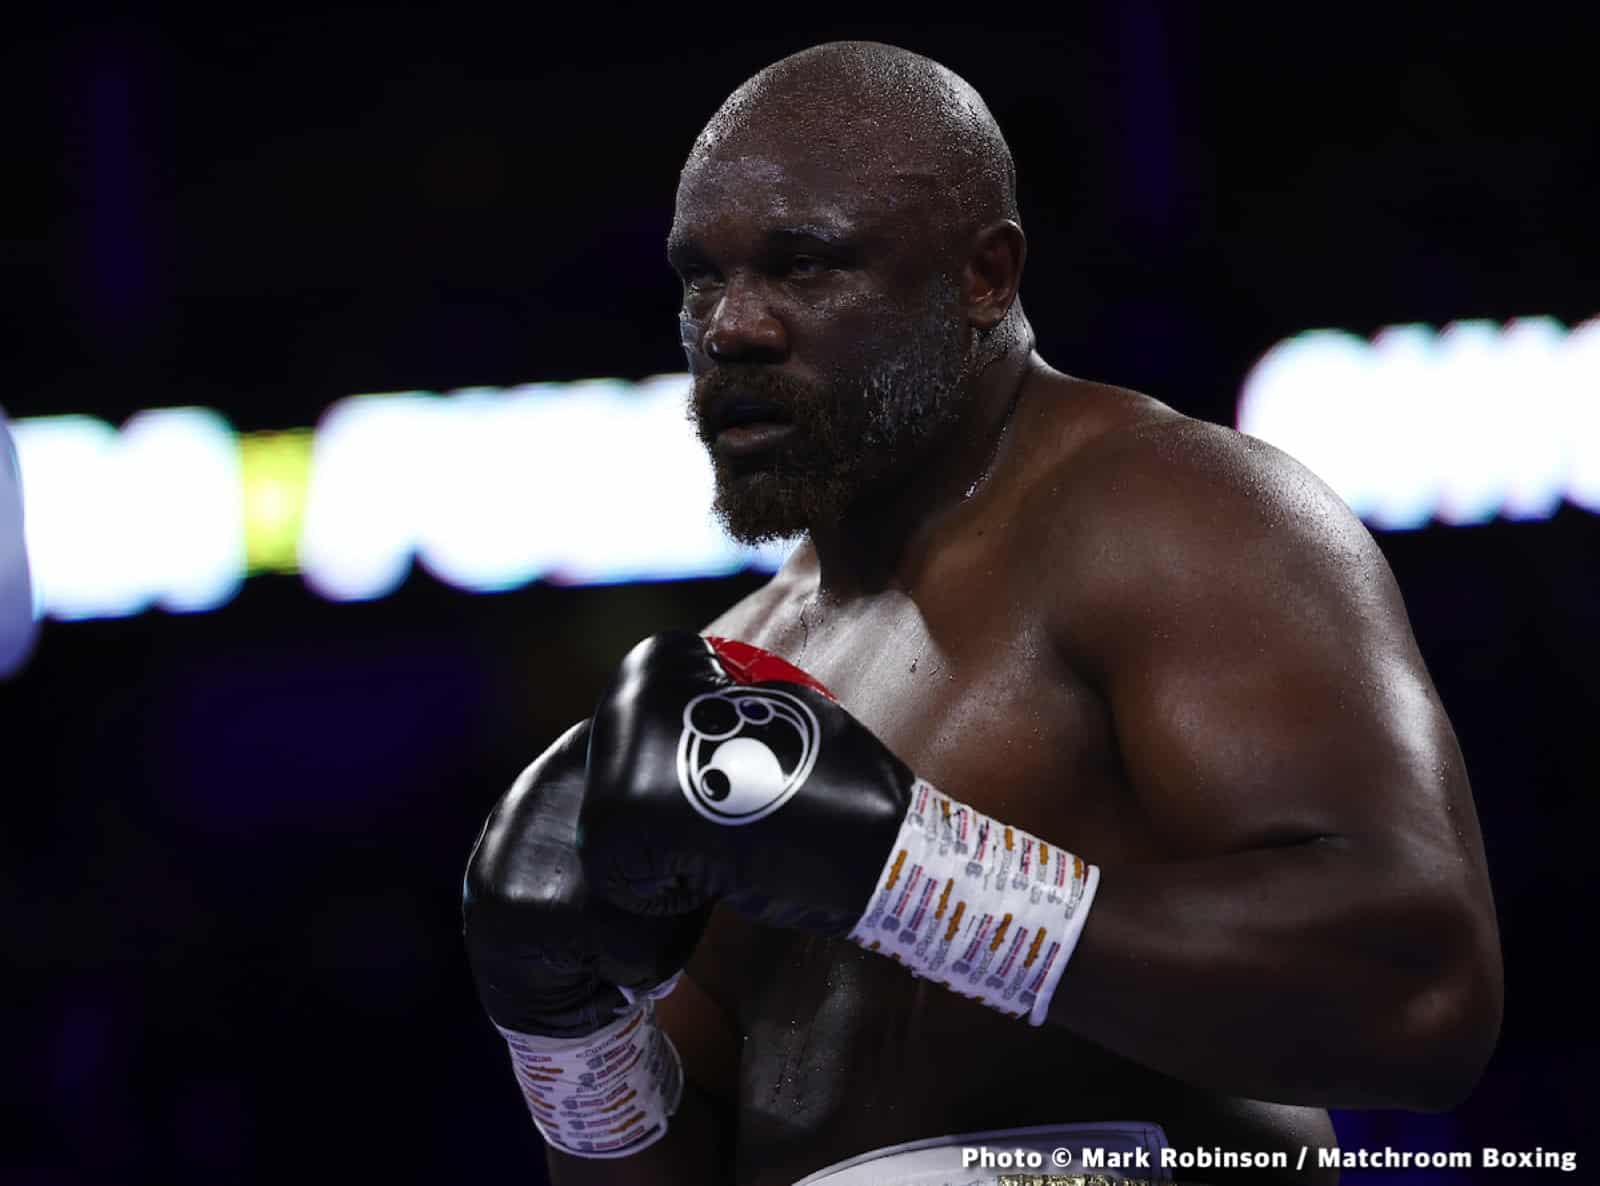 Chisora vs. Pulev 2 - LIVE action results from London